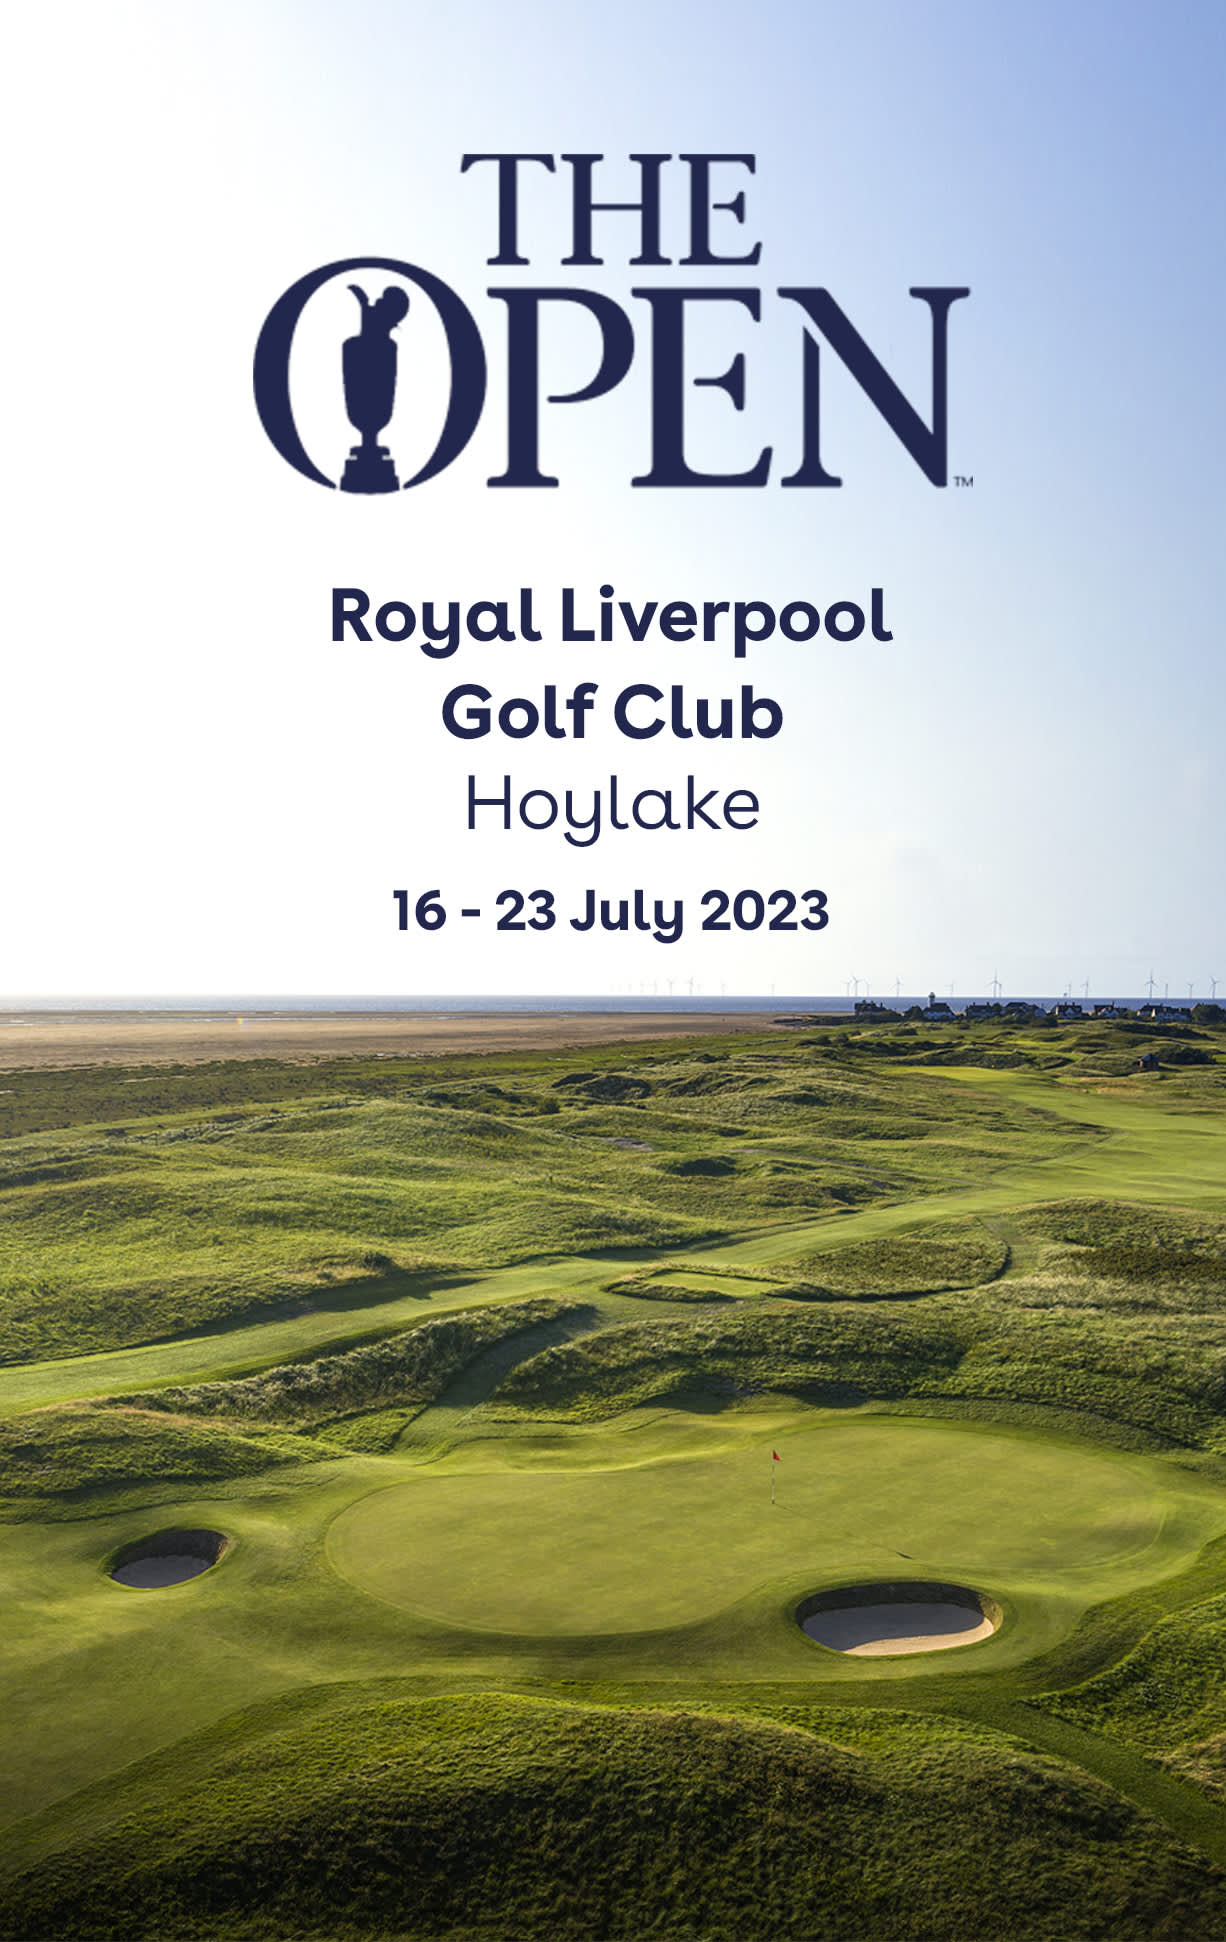 The Open Royal Liverpool Golf Club 16 - 23 July 2023